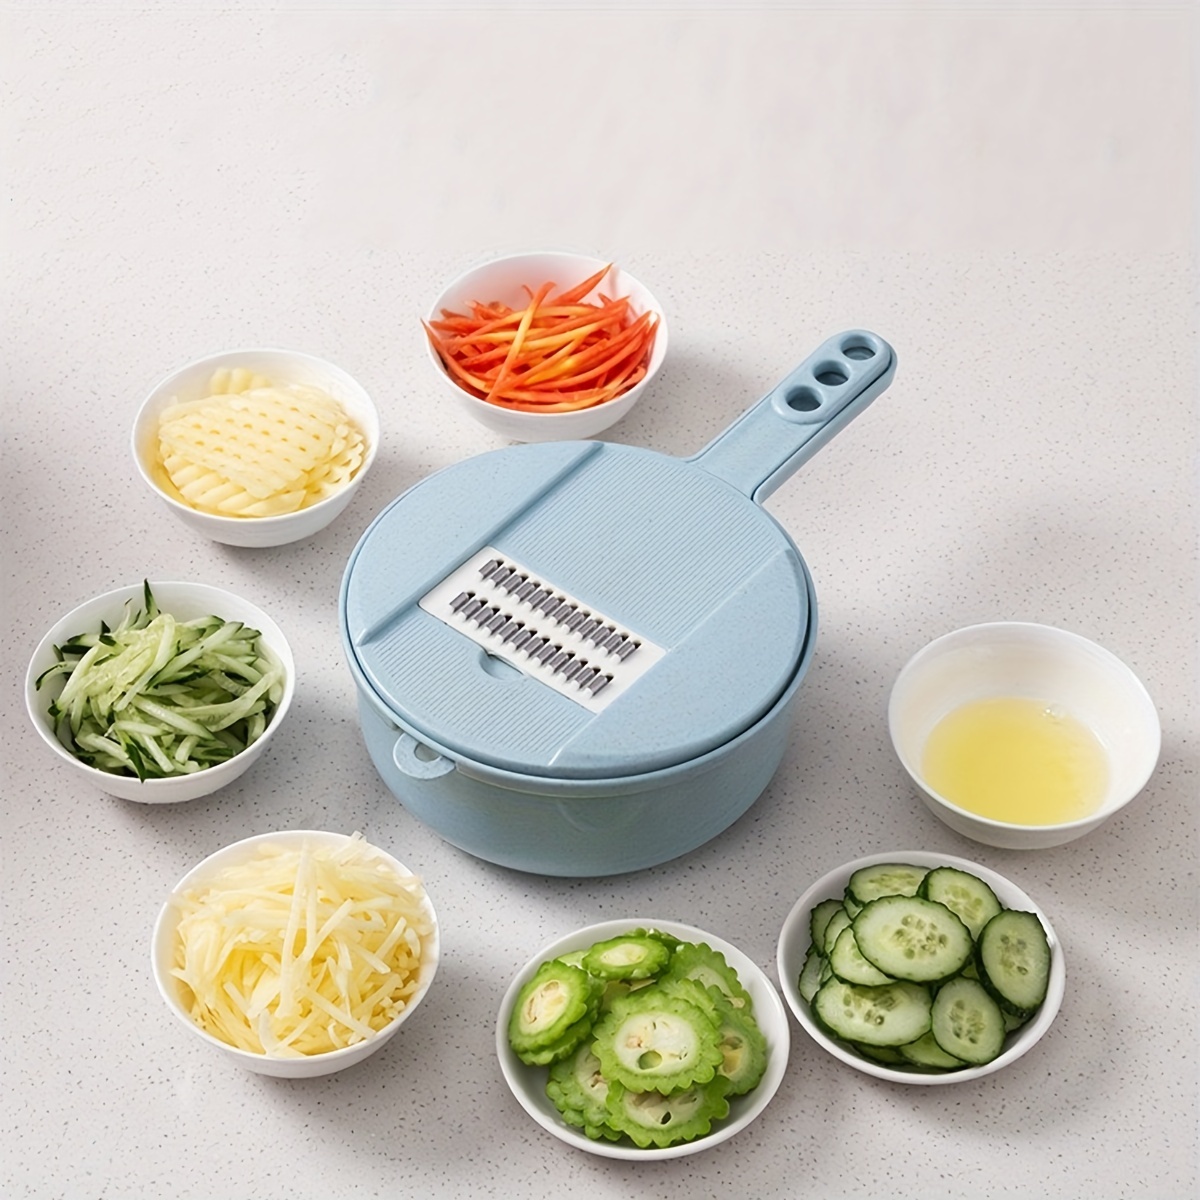 1set/9pcs vegetable cutter with drainage basket, multifunctional